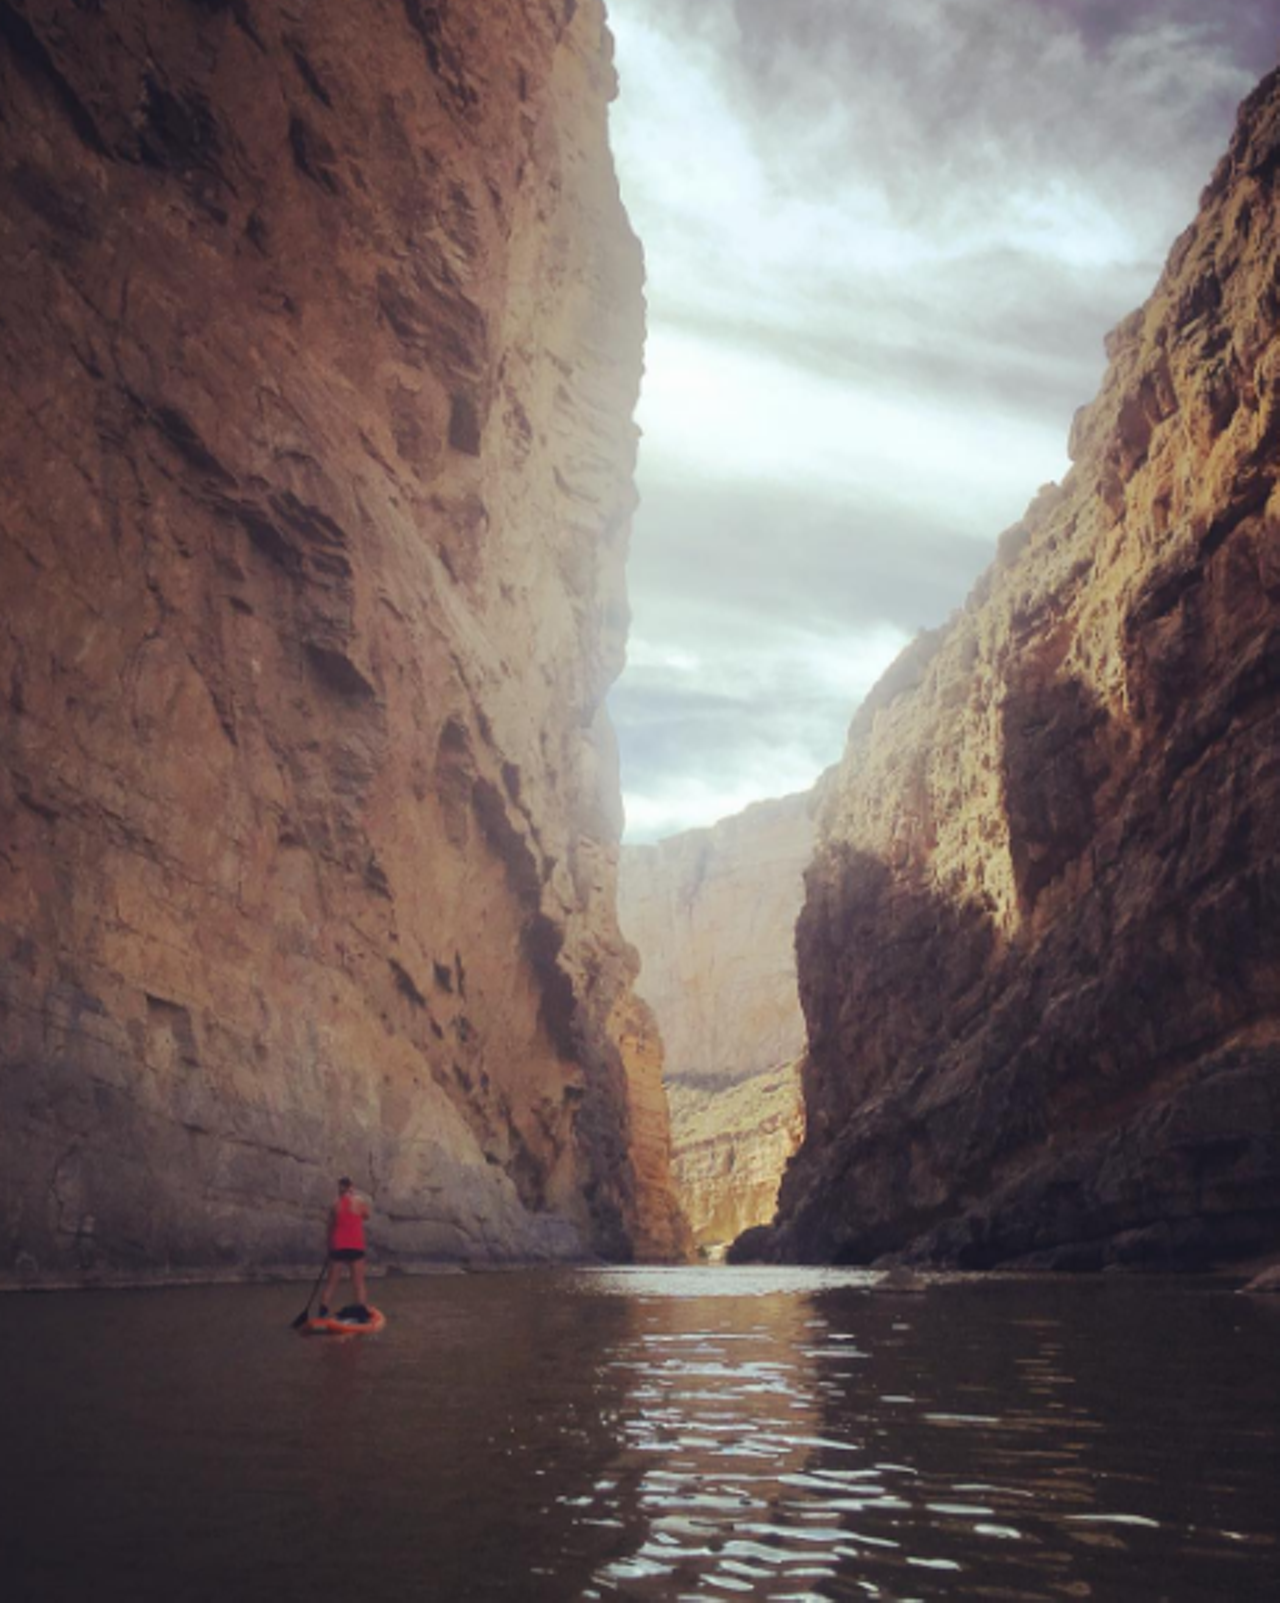 Rio Grande River
Take a Big Bend river tour down the Rio Grande and plan for a long trip when kayaking here  &#151; you'll need a few hours alone just to get to your starting point. We recommend checking in with the National Park Service  before heading out to paddle. 
Photo via Instagram (duanelewis)